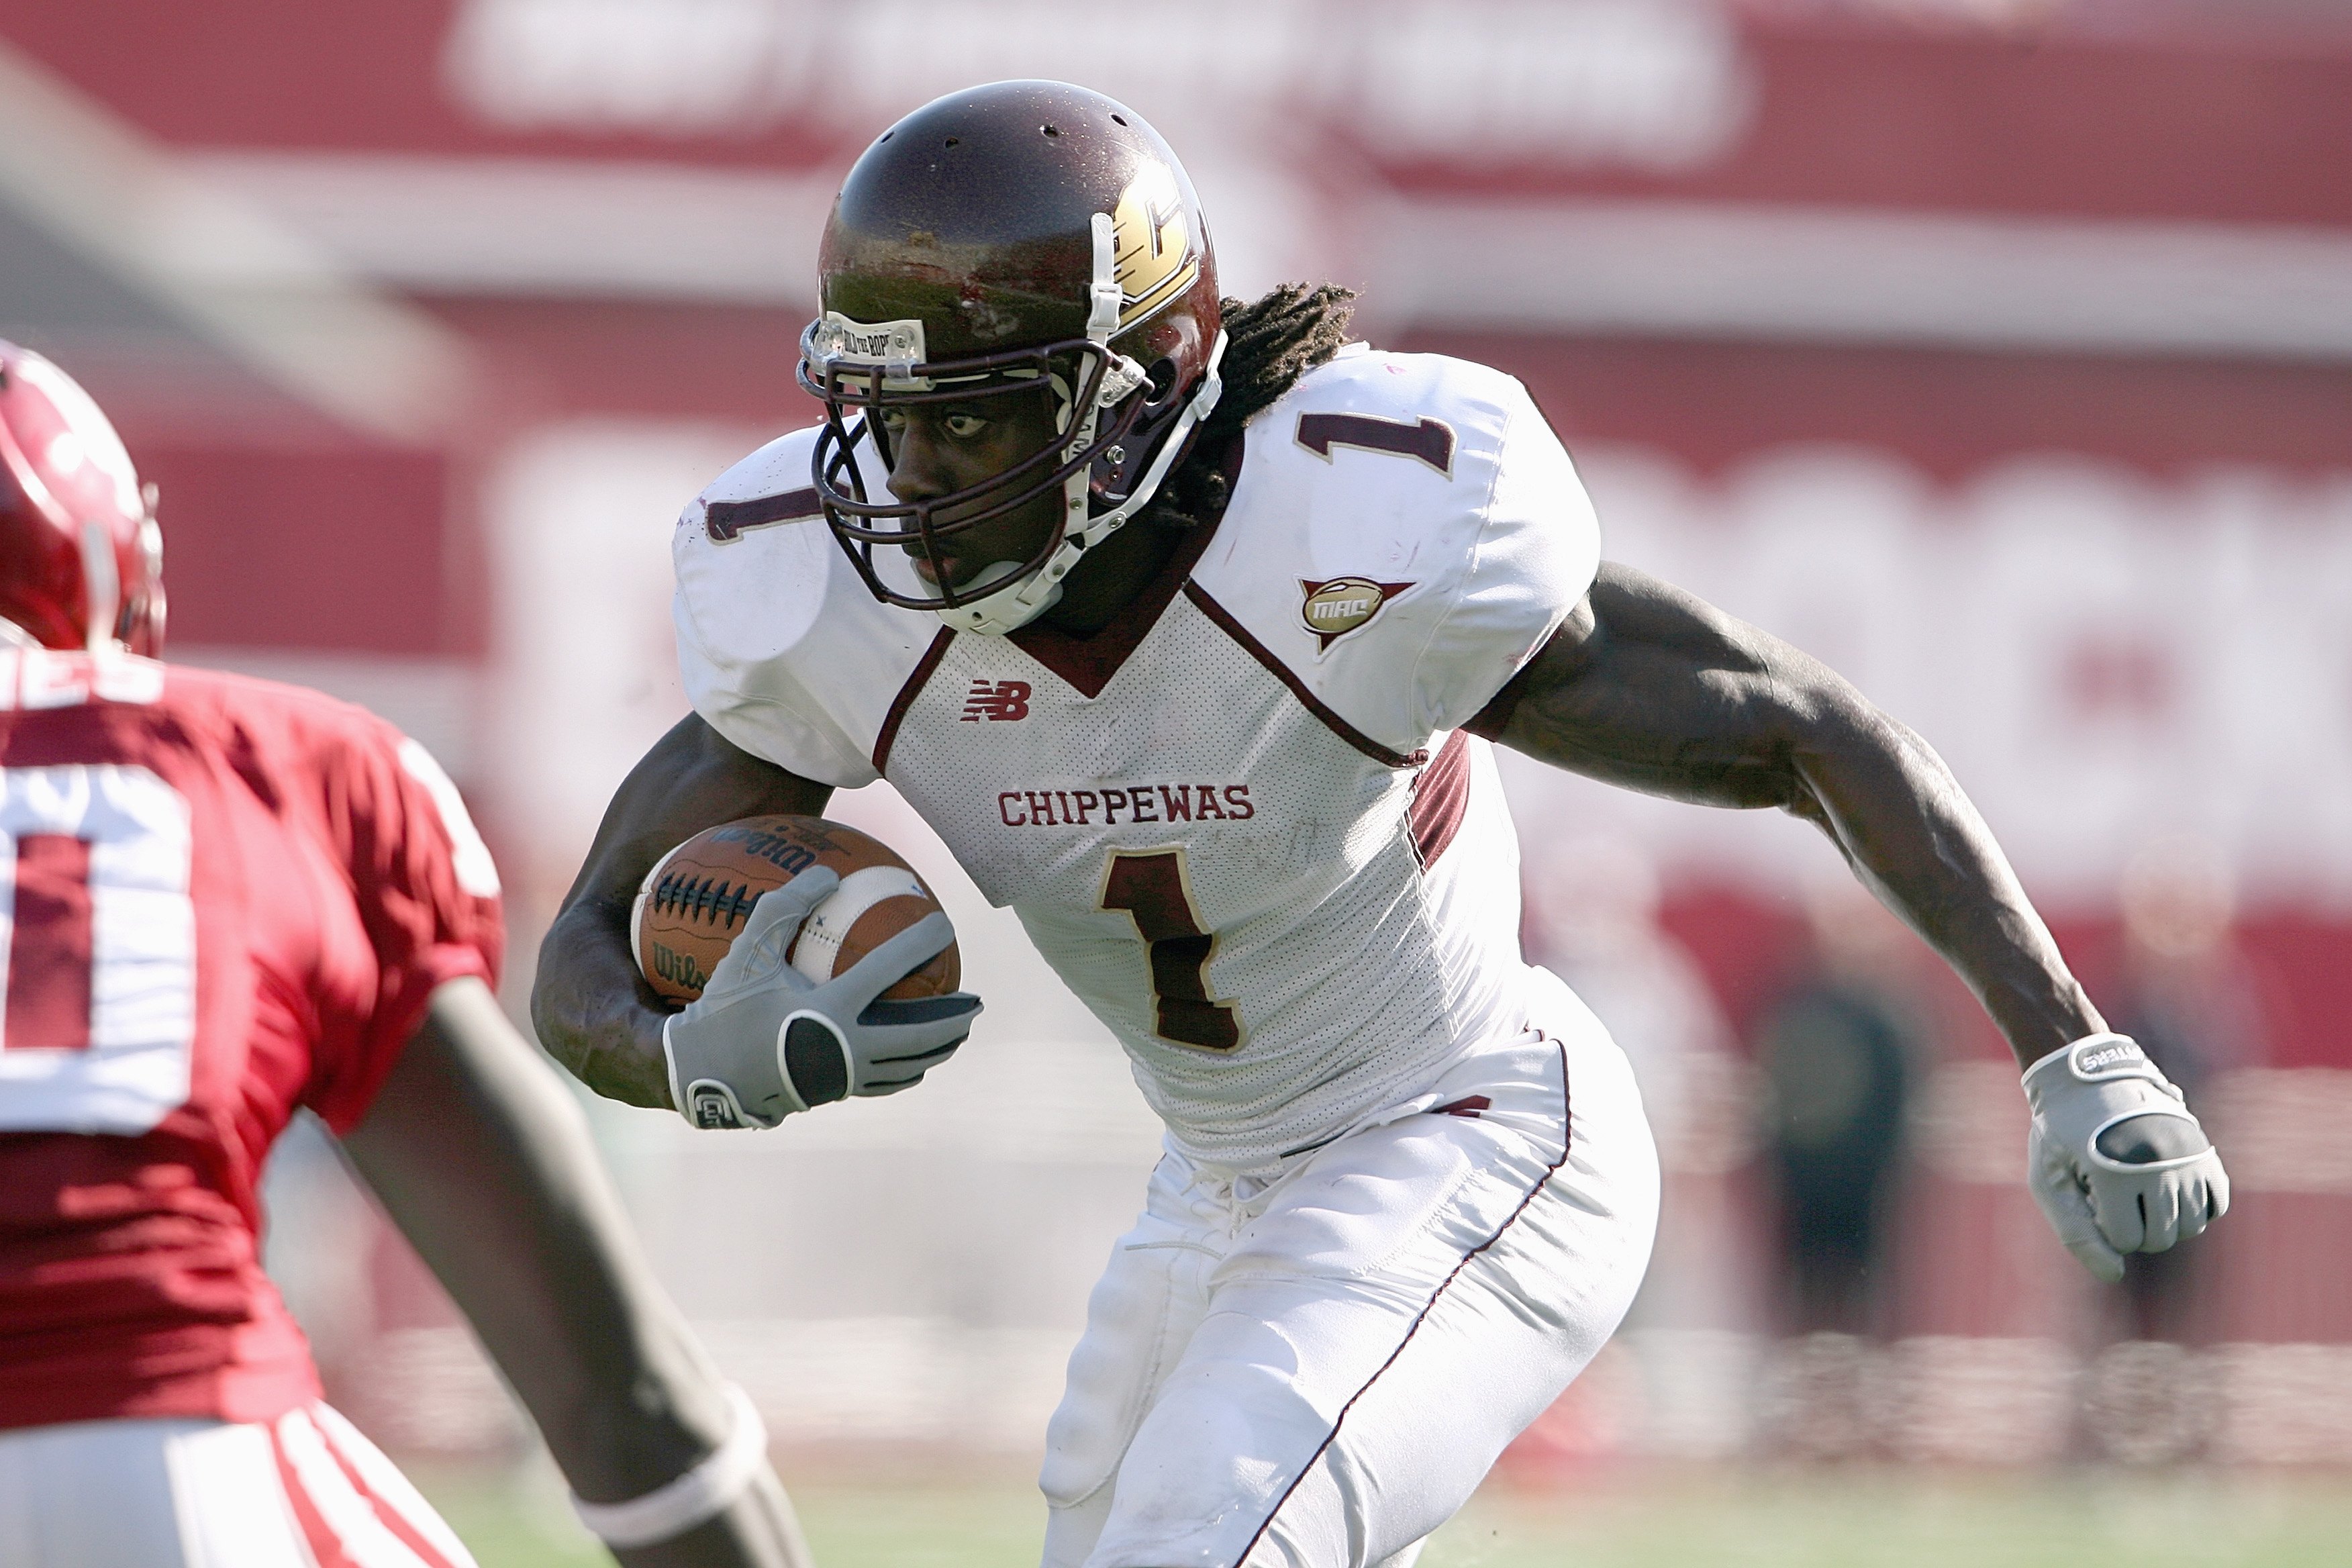 BLOOMINGTON, IN - NOVEMBER 01:  Kito Poblah #1 of the Central Michigan Chippewas carries the ball during the game against the Indiana Hooisers at Memorial Stadium on November 1, 2008 in Bloomington, Indiana.  (Photo by Andy Lyons/Getty Images)